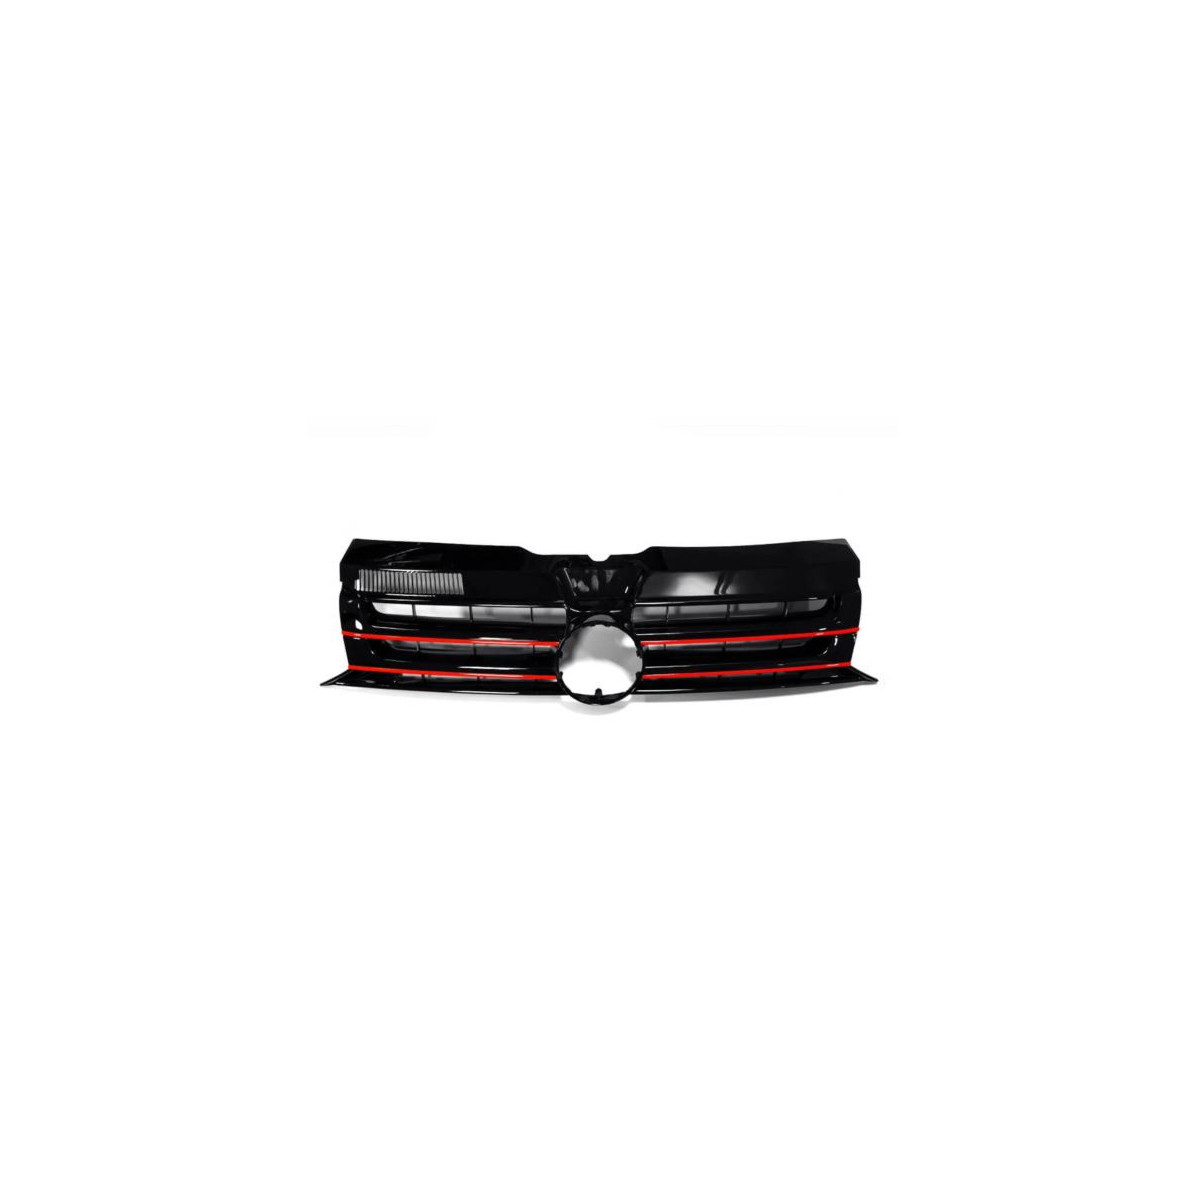 GRILL VW T5 09-15 BADGED WITH RED TRIM